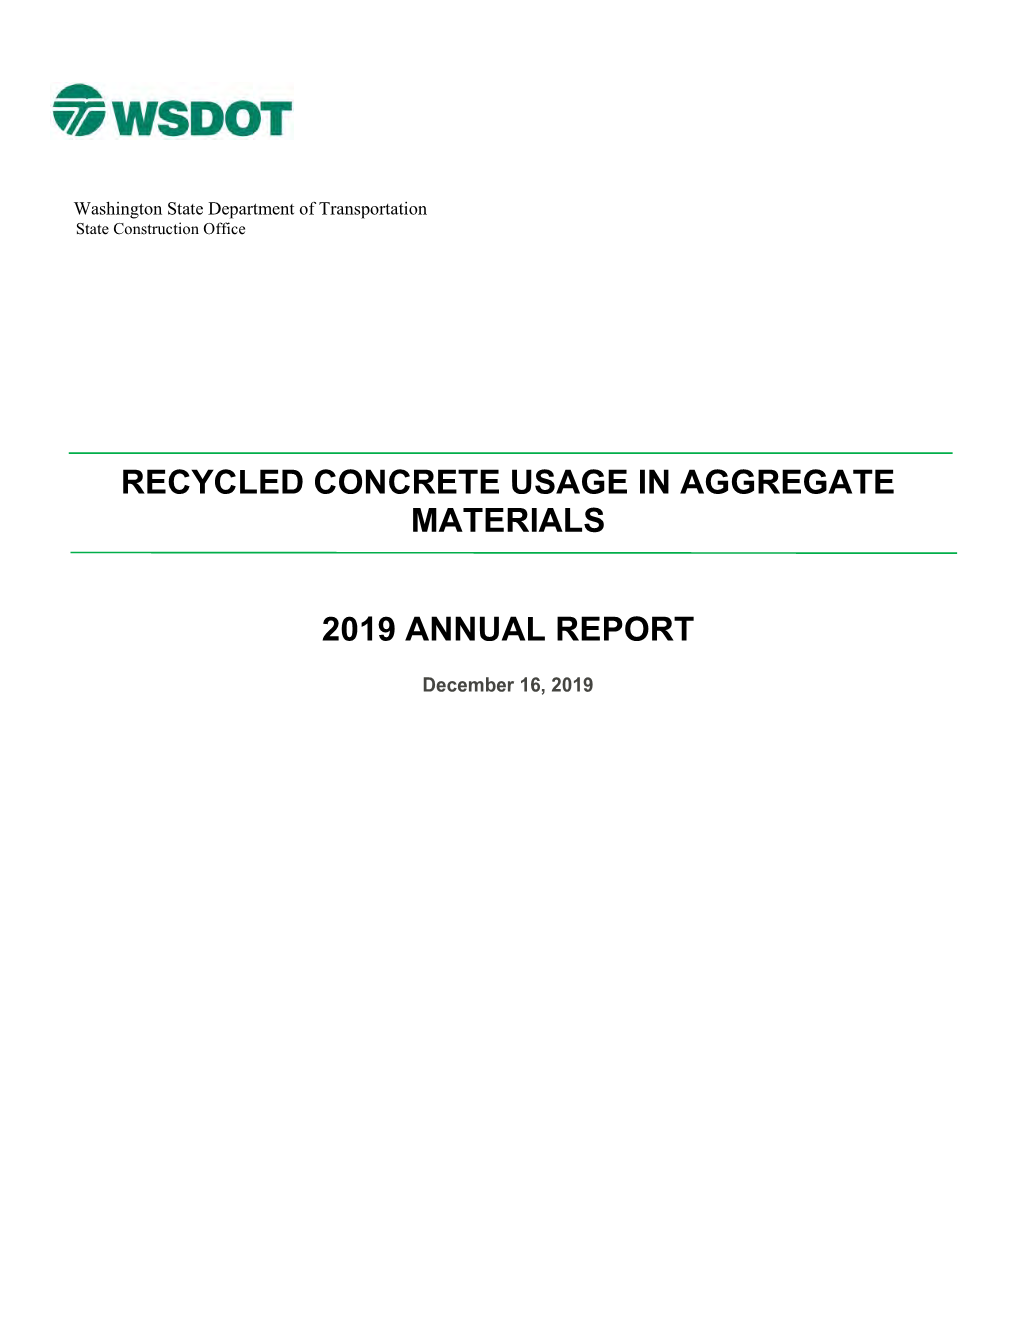 Recycled Concrete Usage in Aggregate Materials